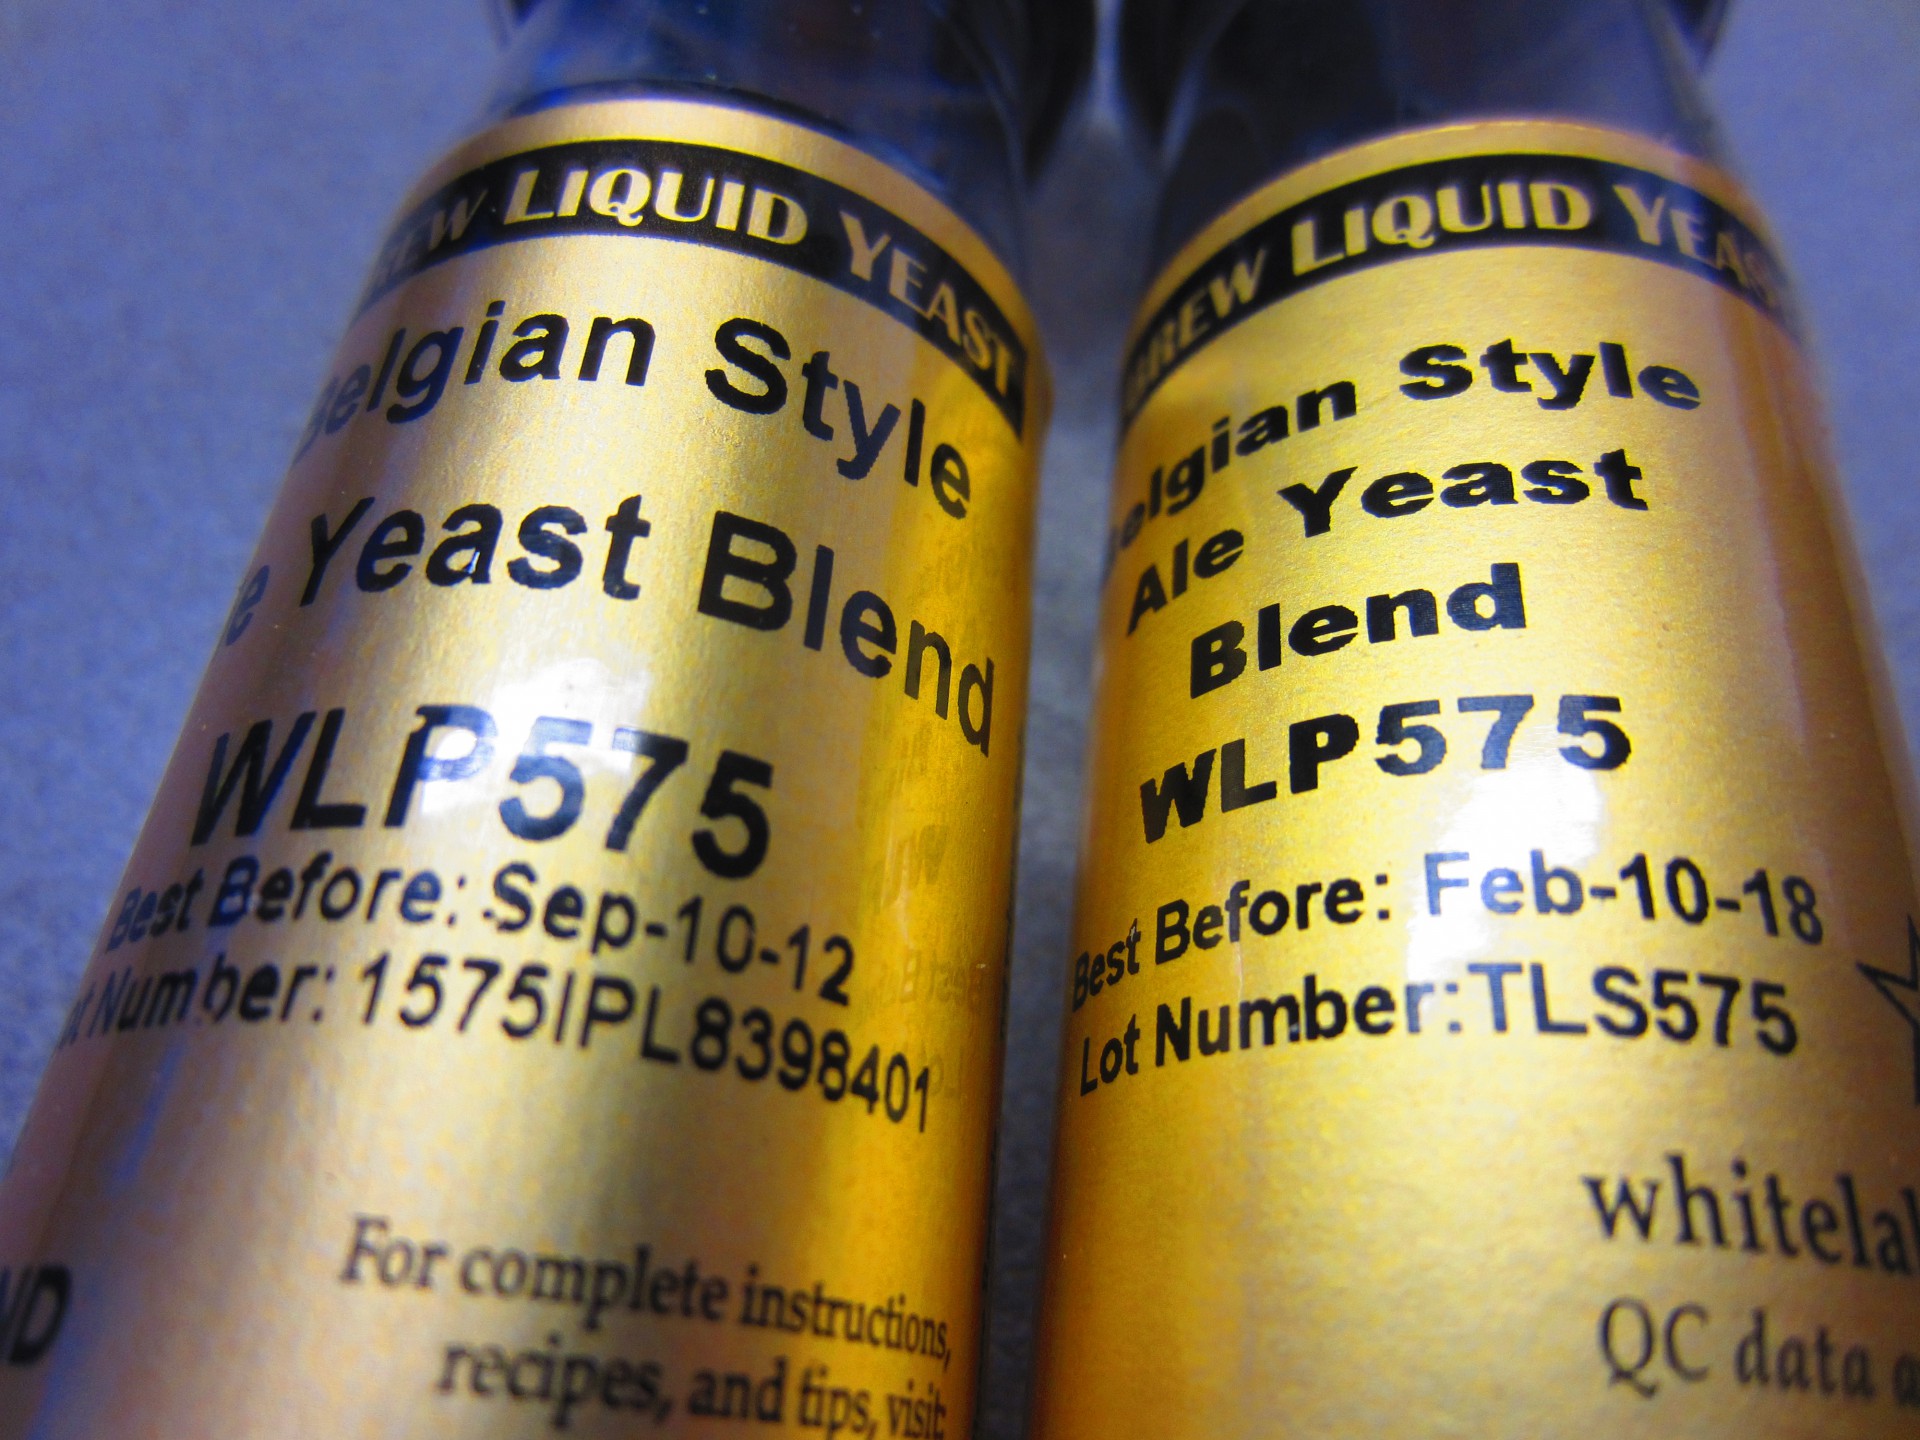 brewing-with-old-yeast-vs-new-yeast-pt-1-beer-syndicate-blog